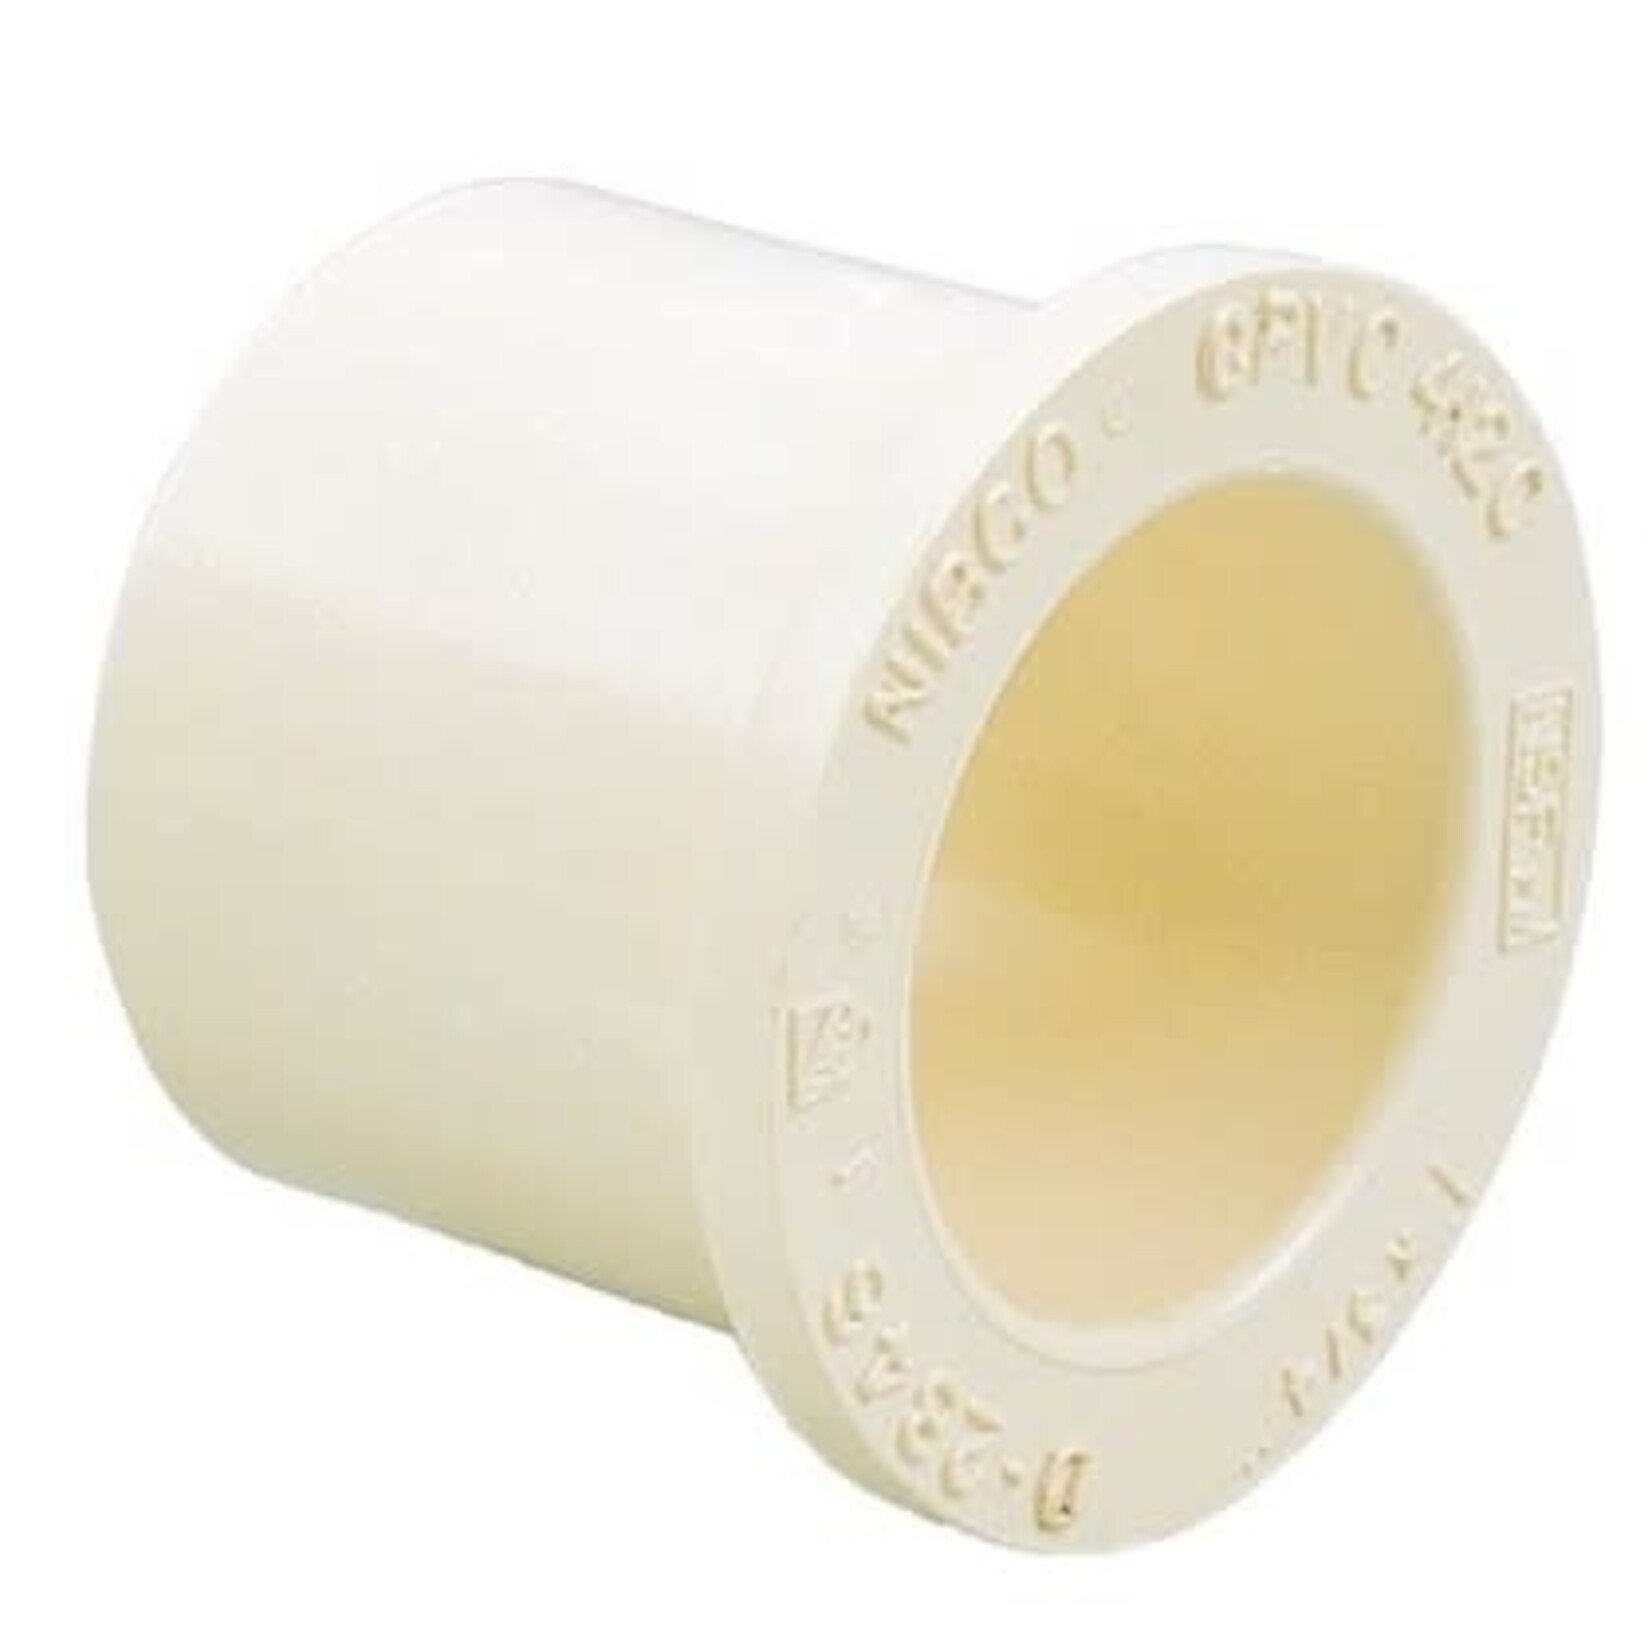 NIBCO 2 IN X 3/4 IN CPVC SCHEDULE 40 REDUCER BUSHING